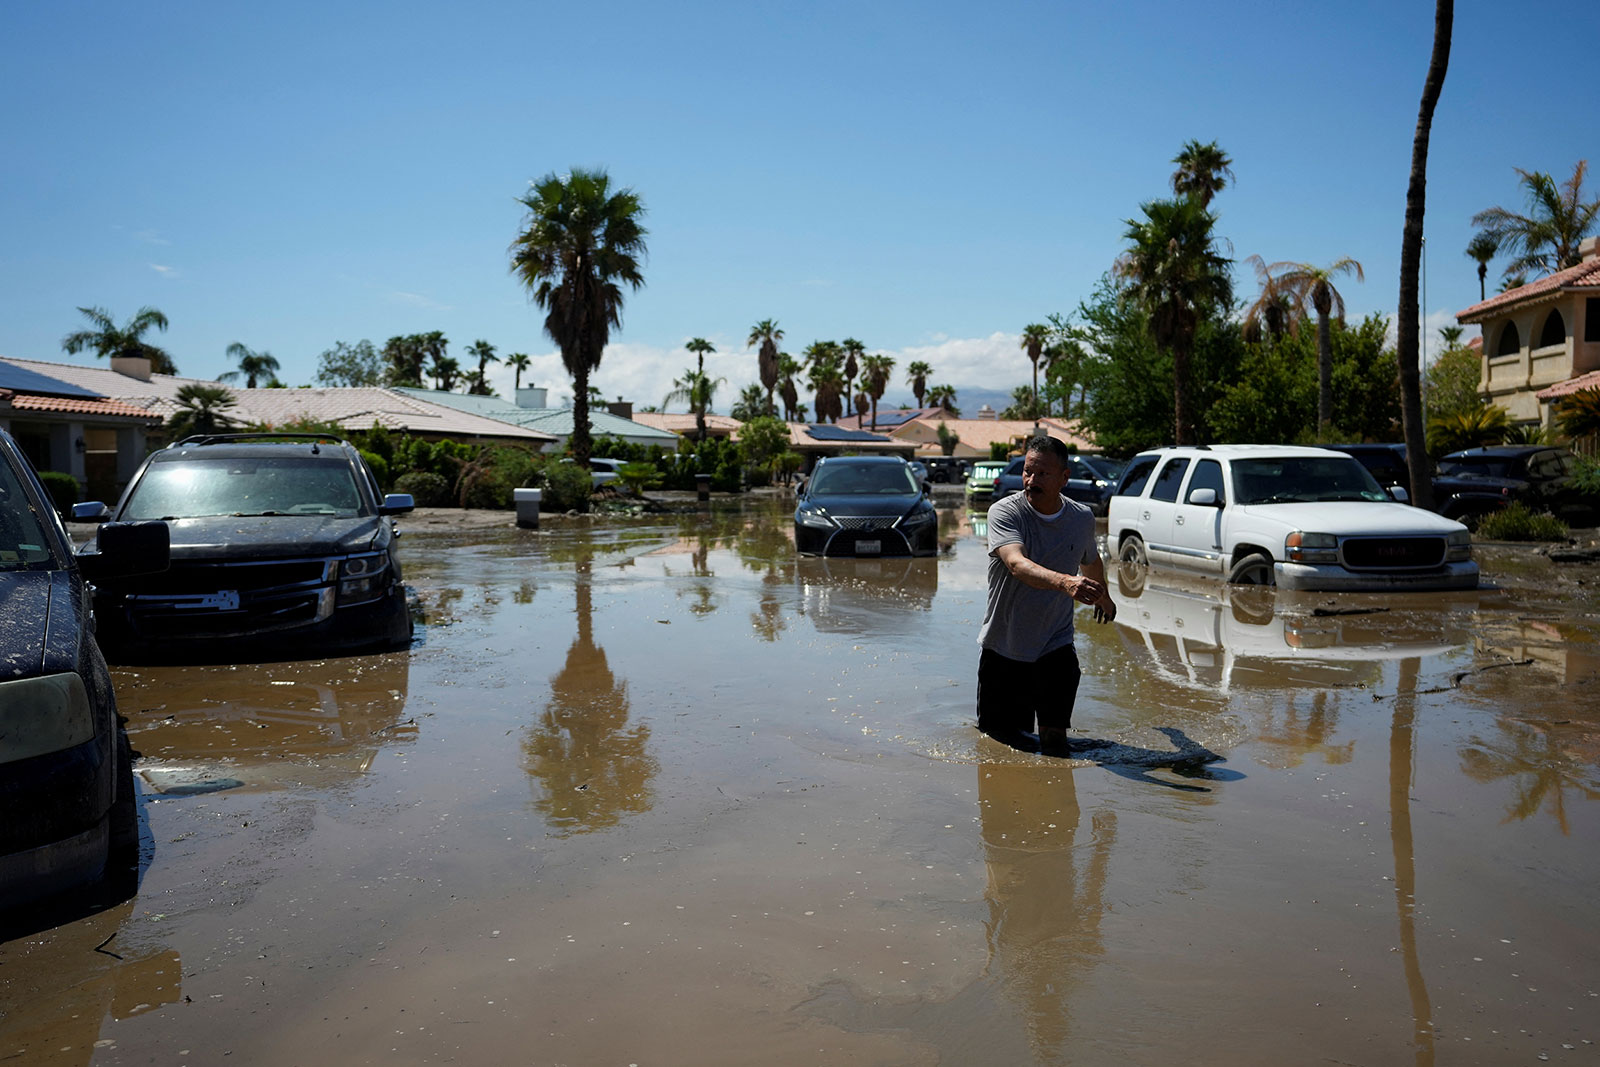 Ronald Mendiola returns to his home through a flooded street in Cathedral City, California, on Monday.